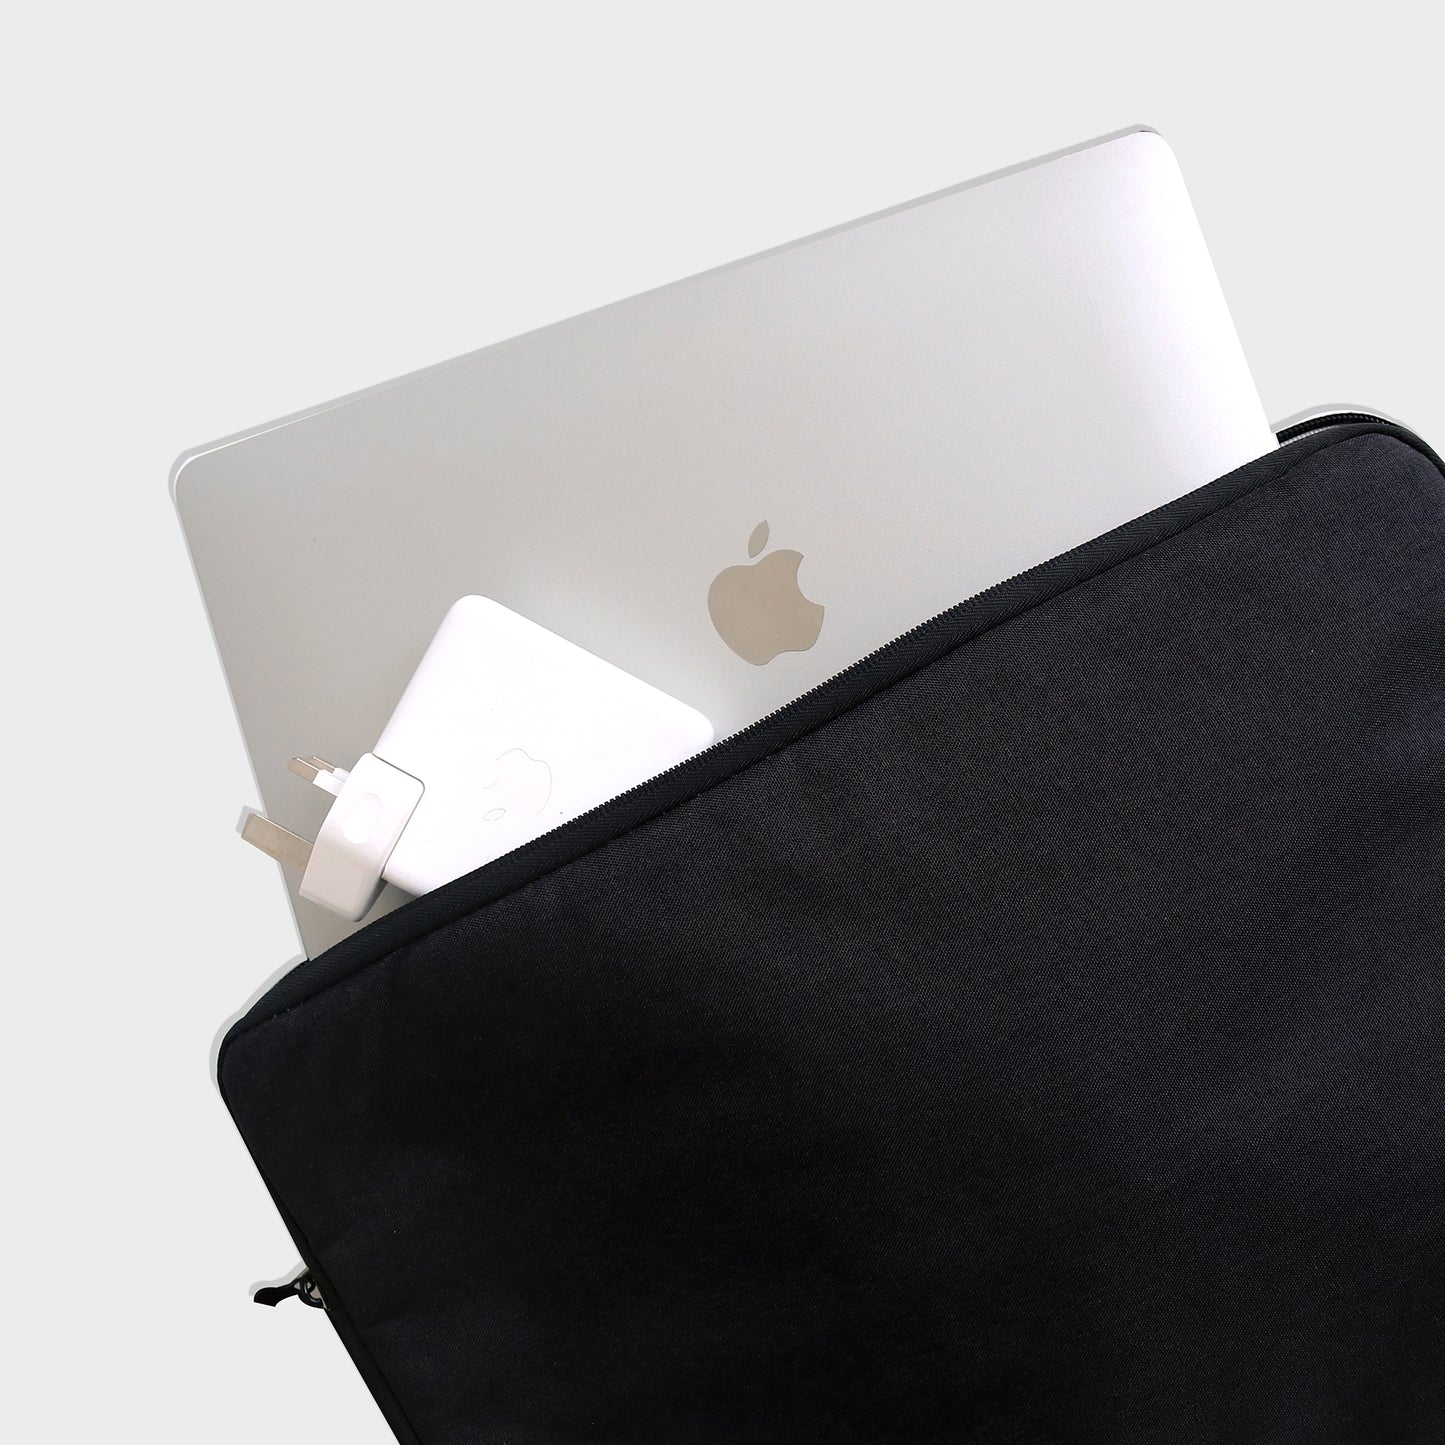 Universal Laptop Pouch - Good Day 1.0